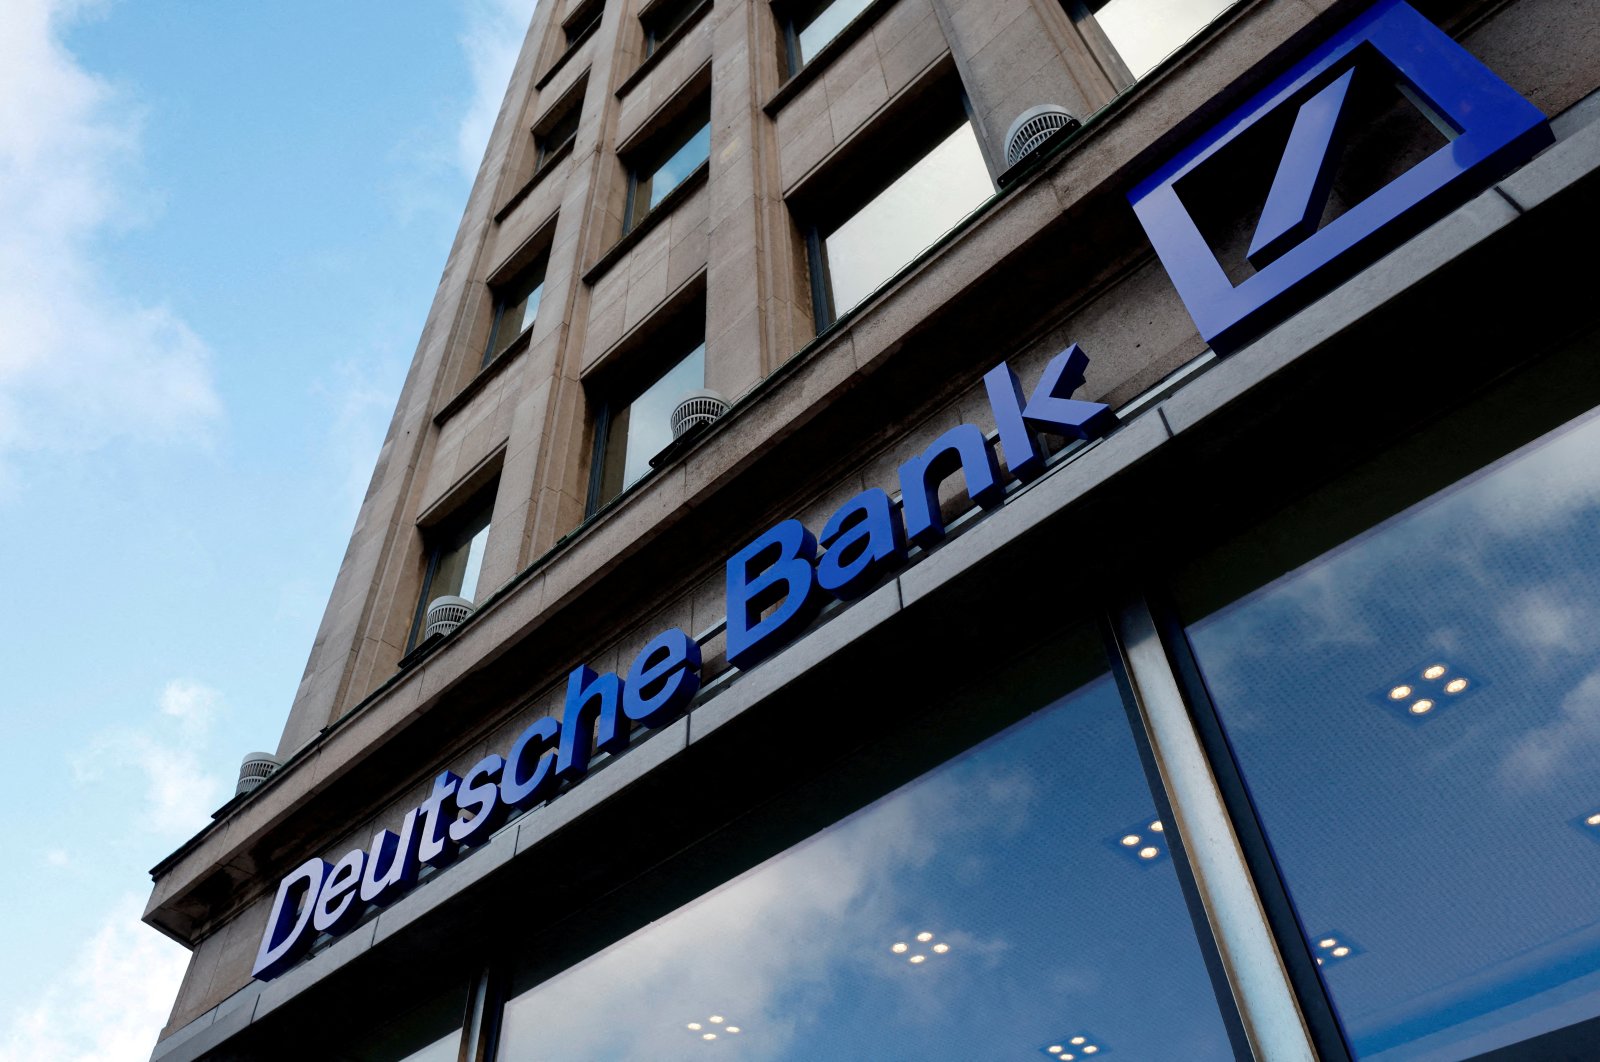 Deutsche Bank tells investors some of their Russian shares missing